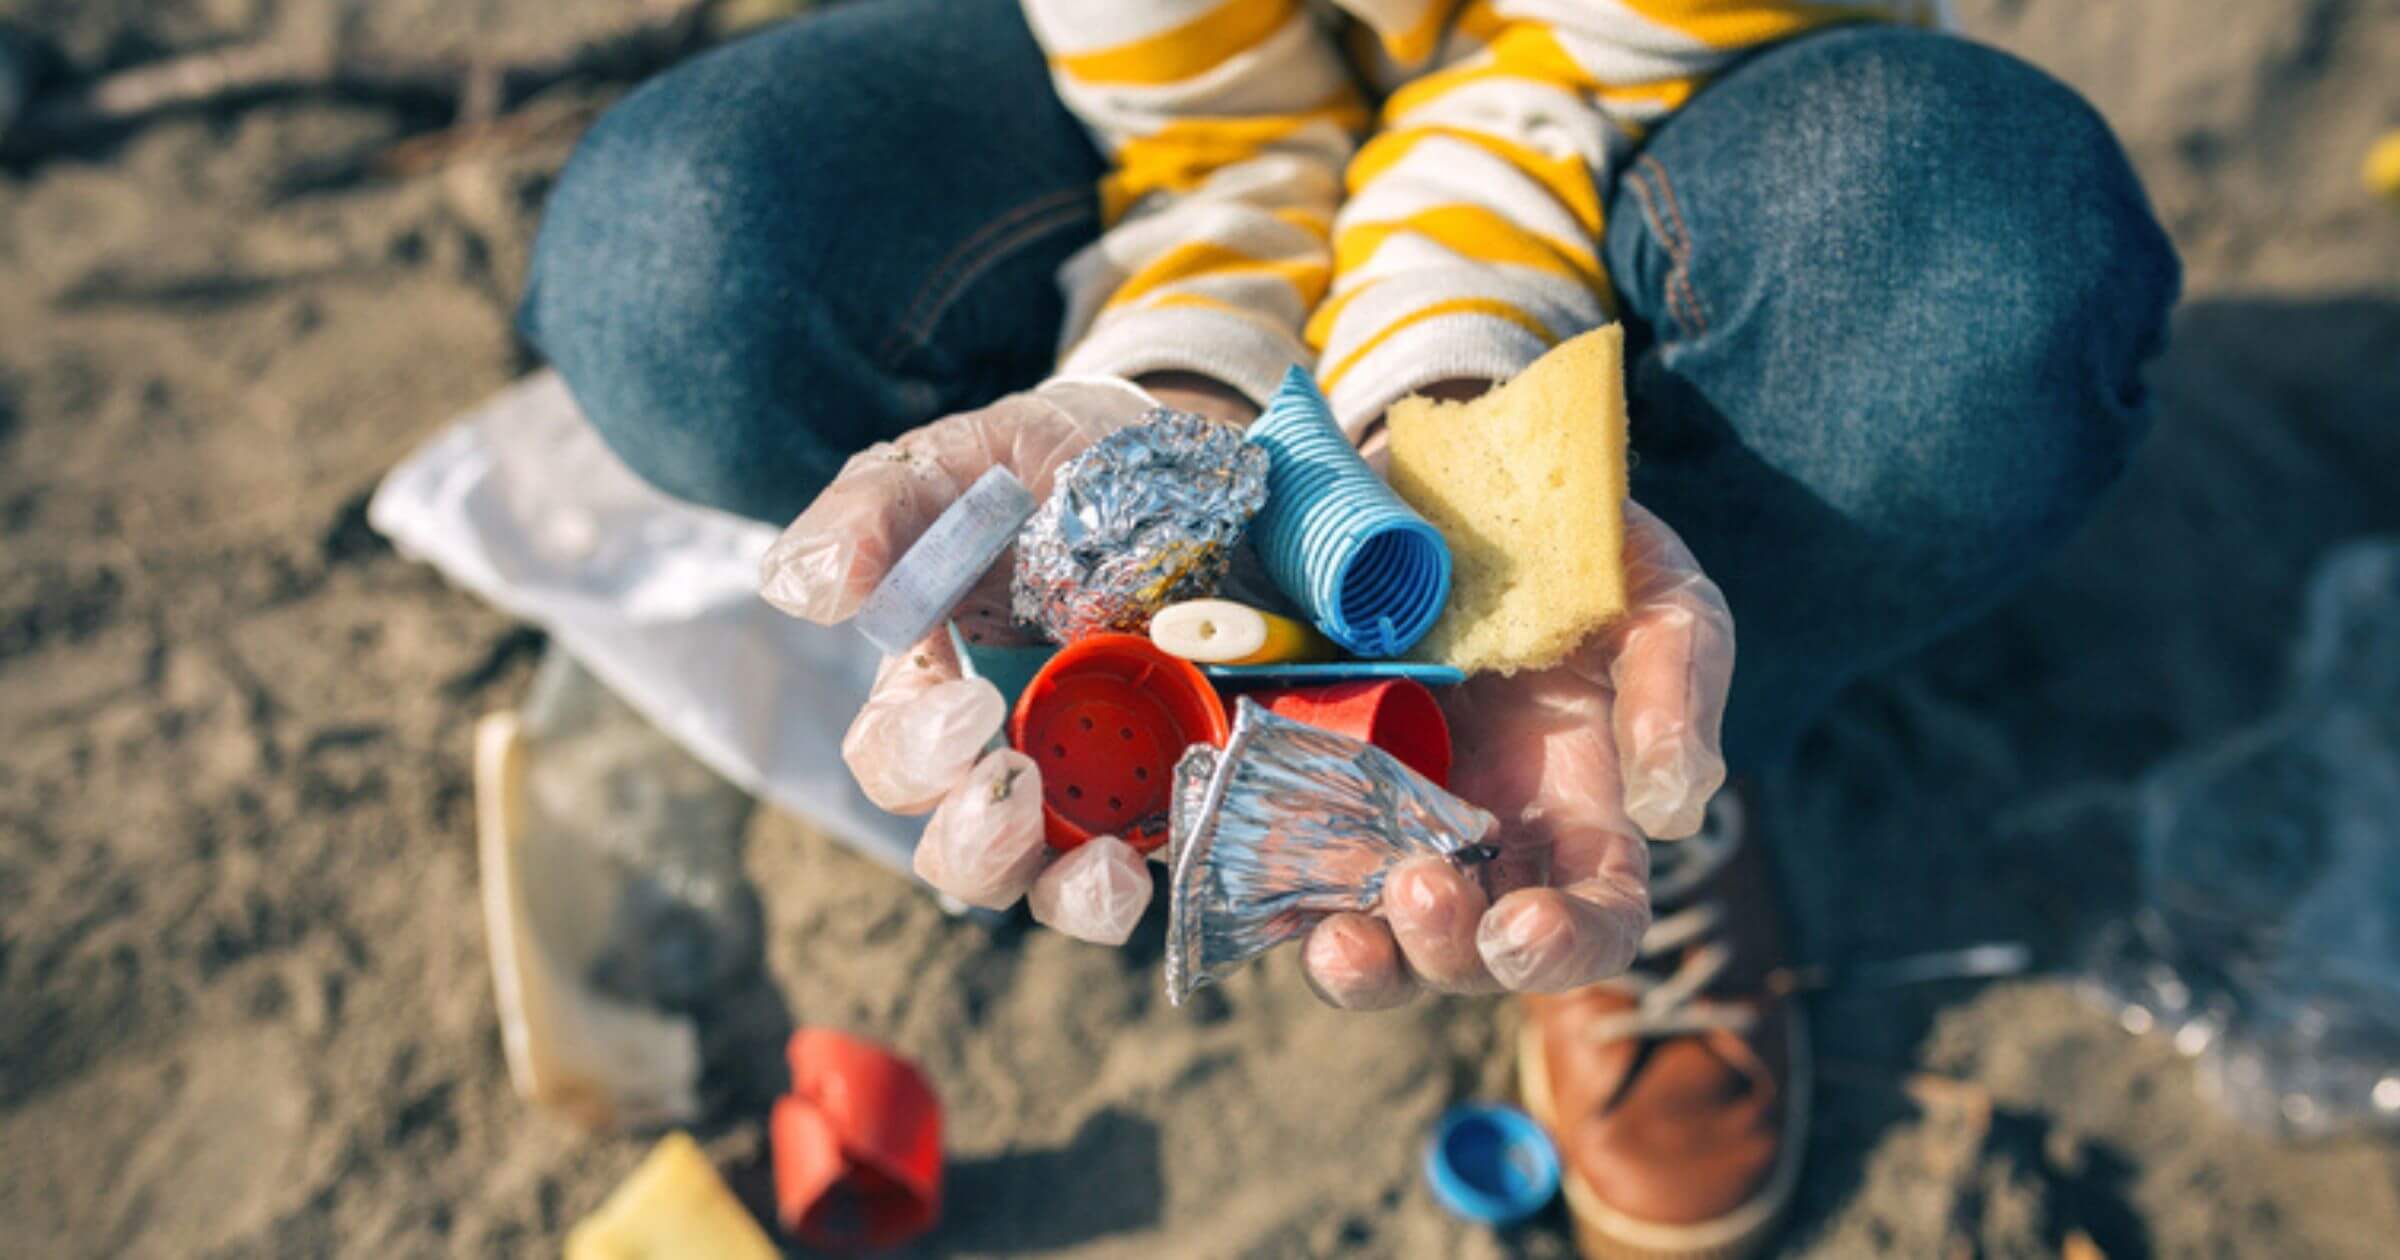 Person crouched down with two hands full of plastic items from a beach cleanup